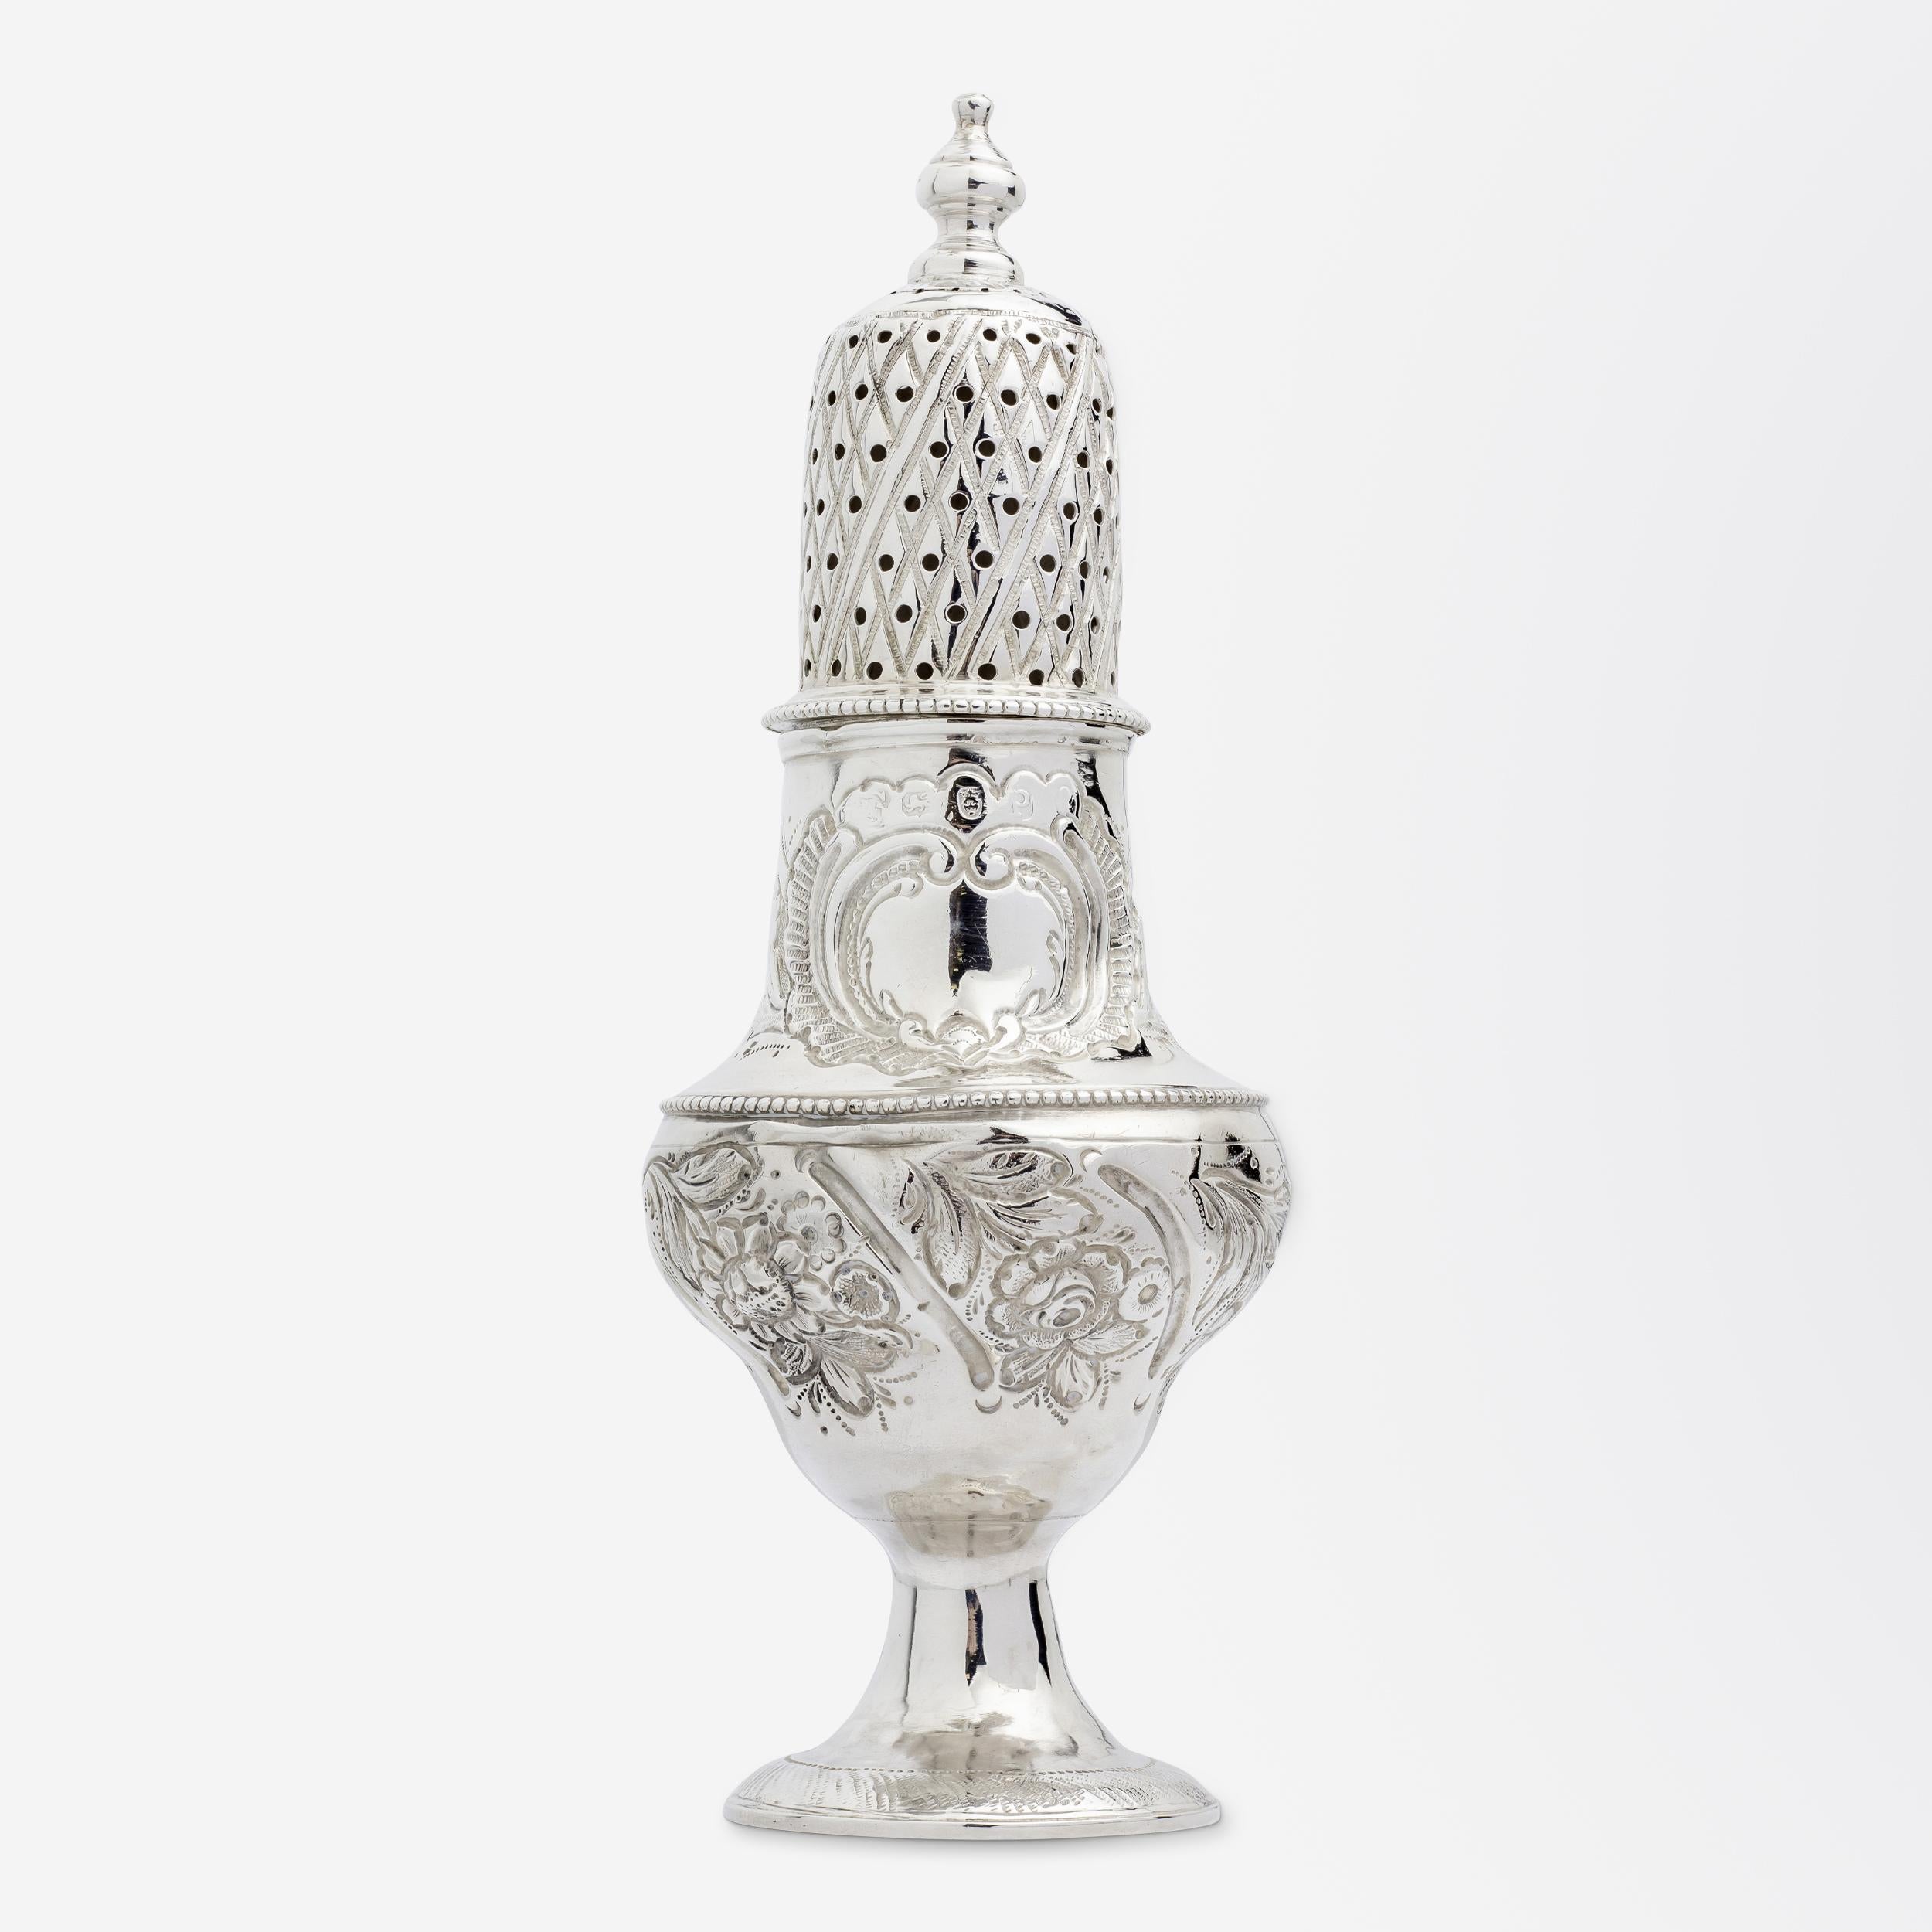 A rare George III period sterling silver sugar shaker with floral repousse decor by members of the famed English silversmithing family, The Batemans. The ornate sugar shaker has crisp marks to the lid, and rubbed marks to the base both for Peter &